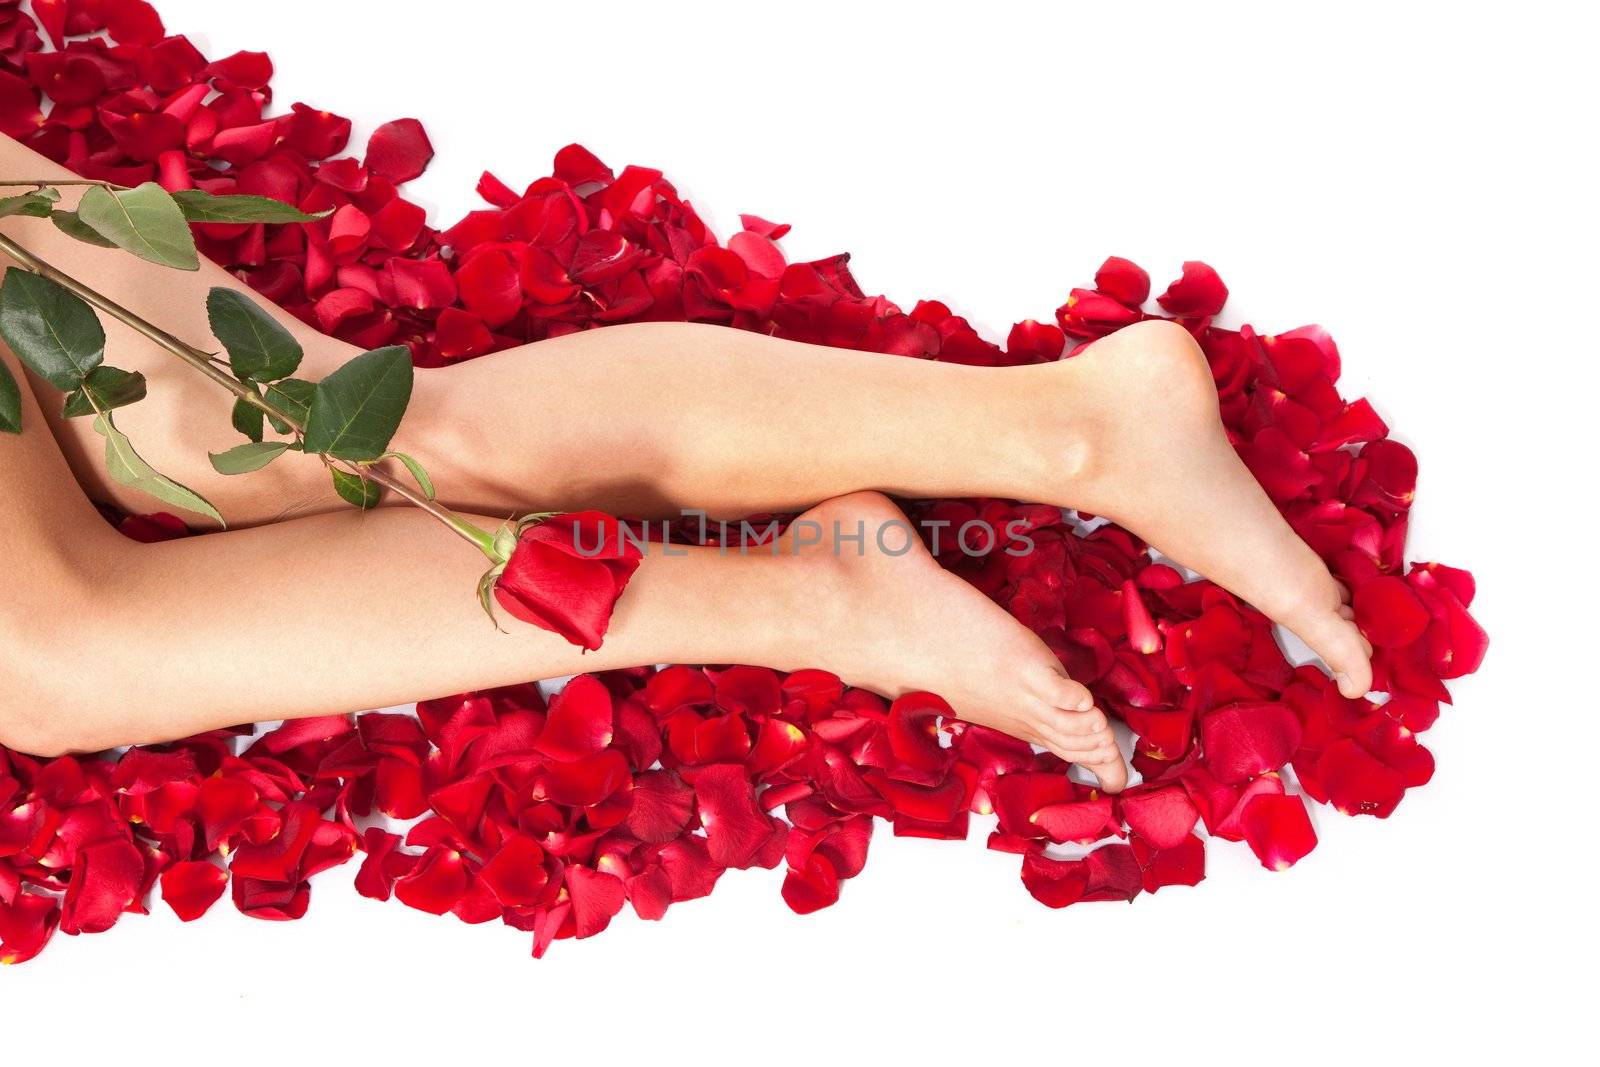 Beautiful body of woman against petals of red roses with flower